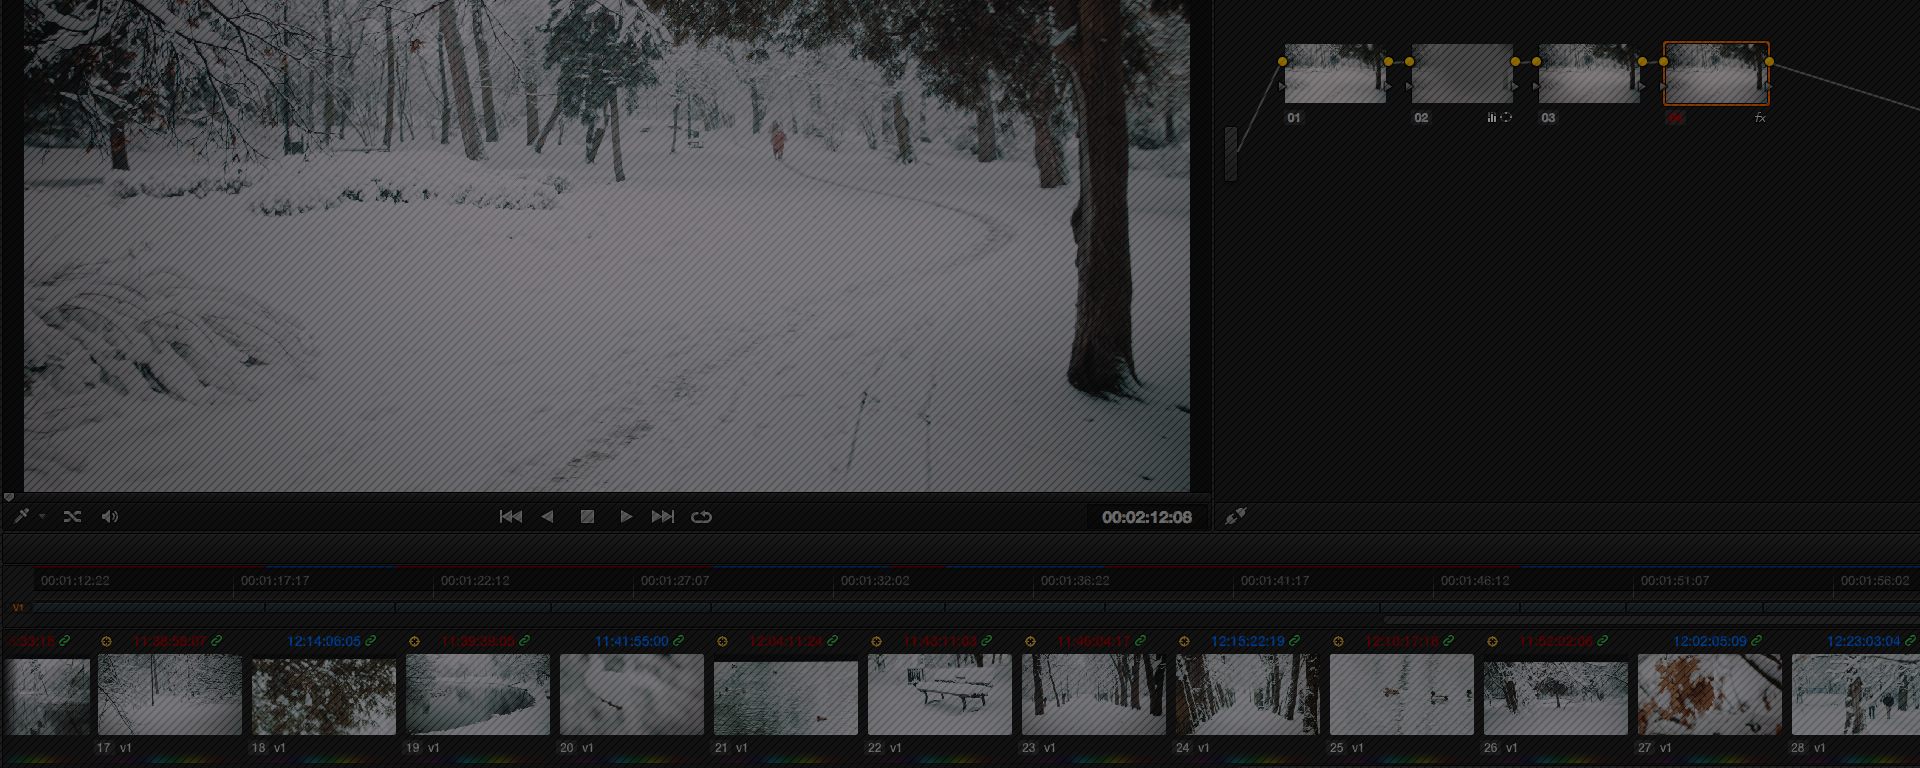 Discovering processing workflow of DaVinci Resolve